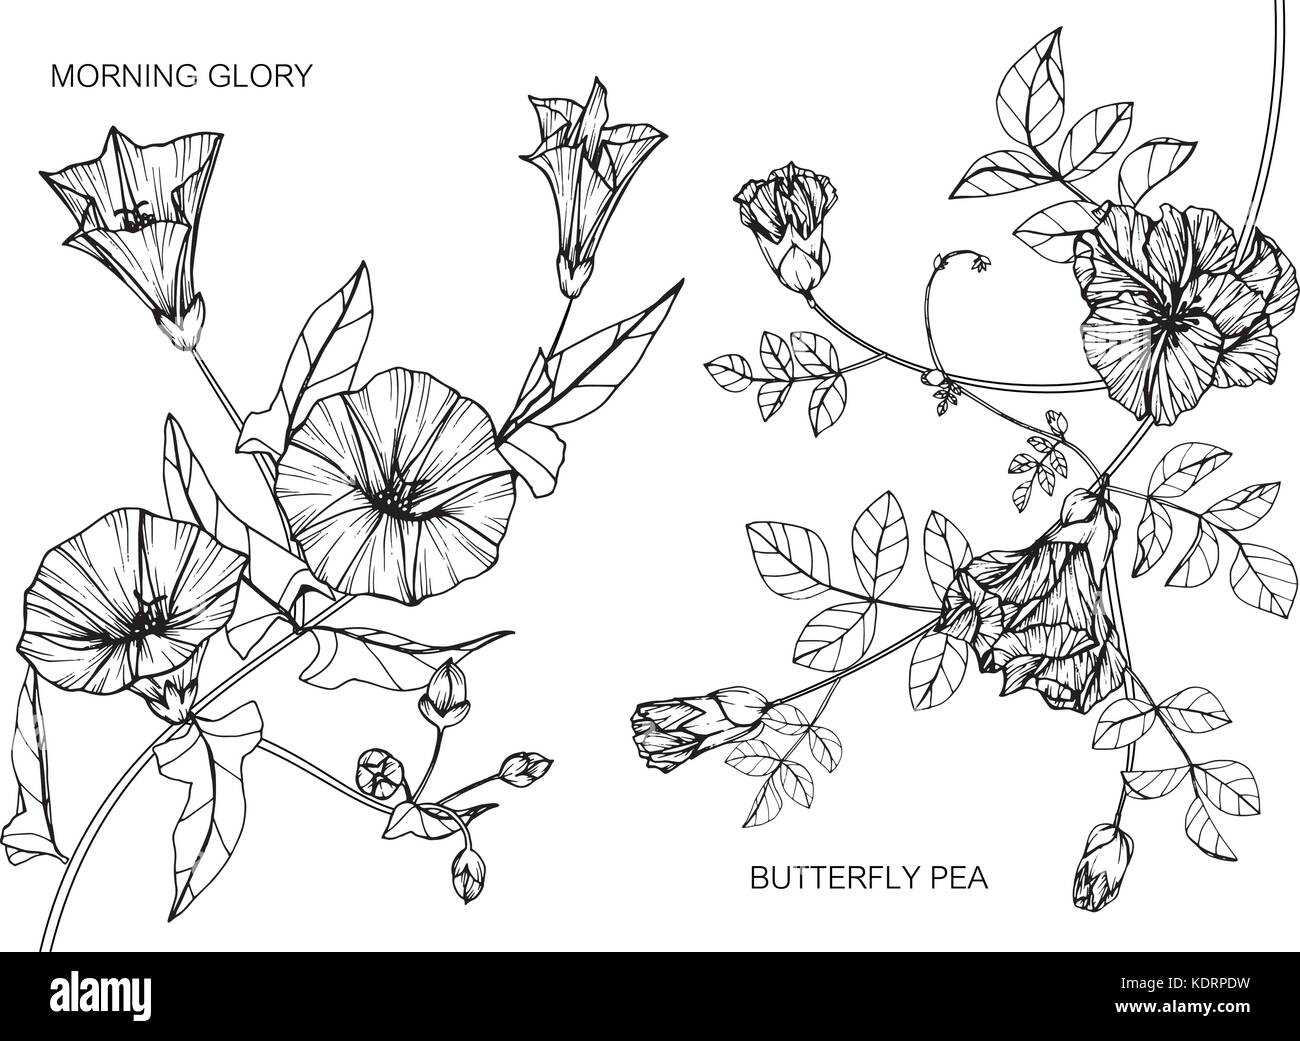 Morning glory and Butterfly pea flower drawing  illustration. Black and white with line art. Stock Vector